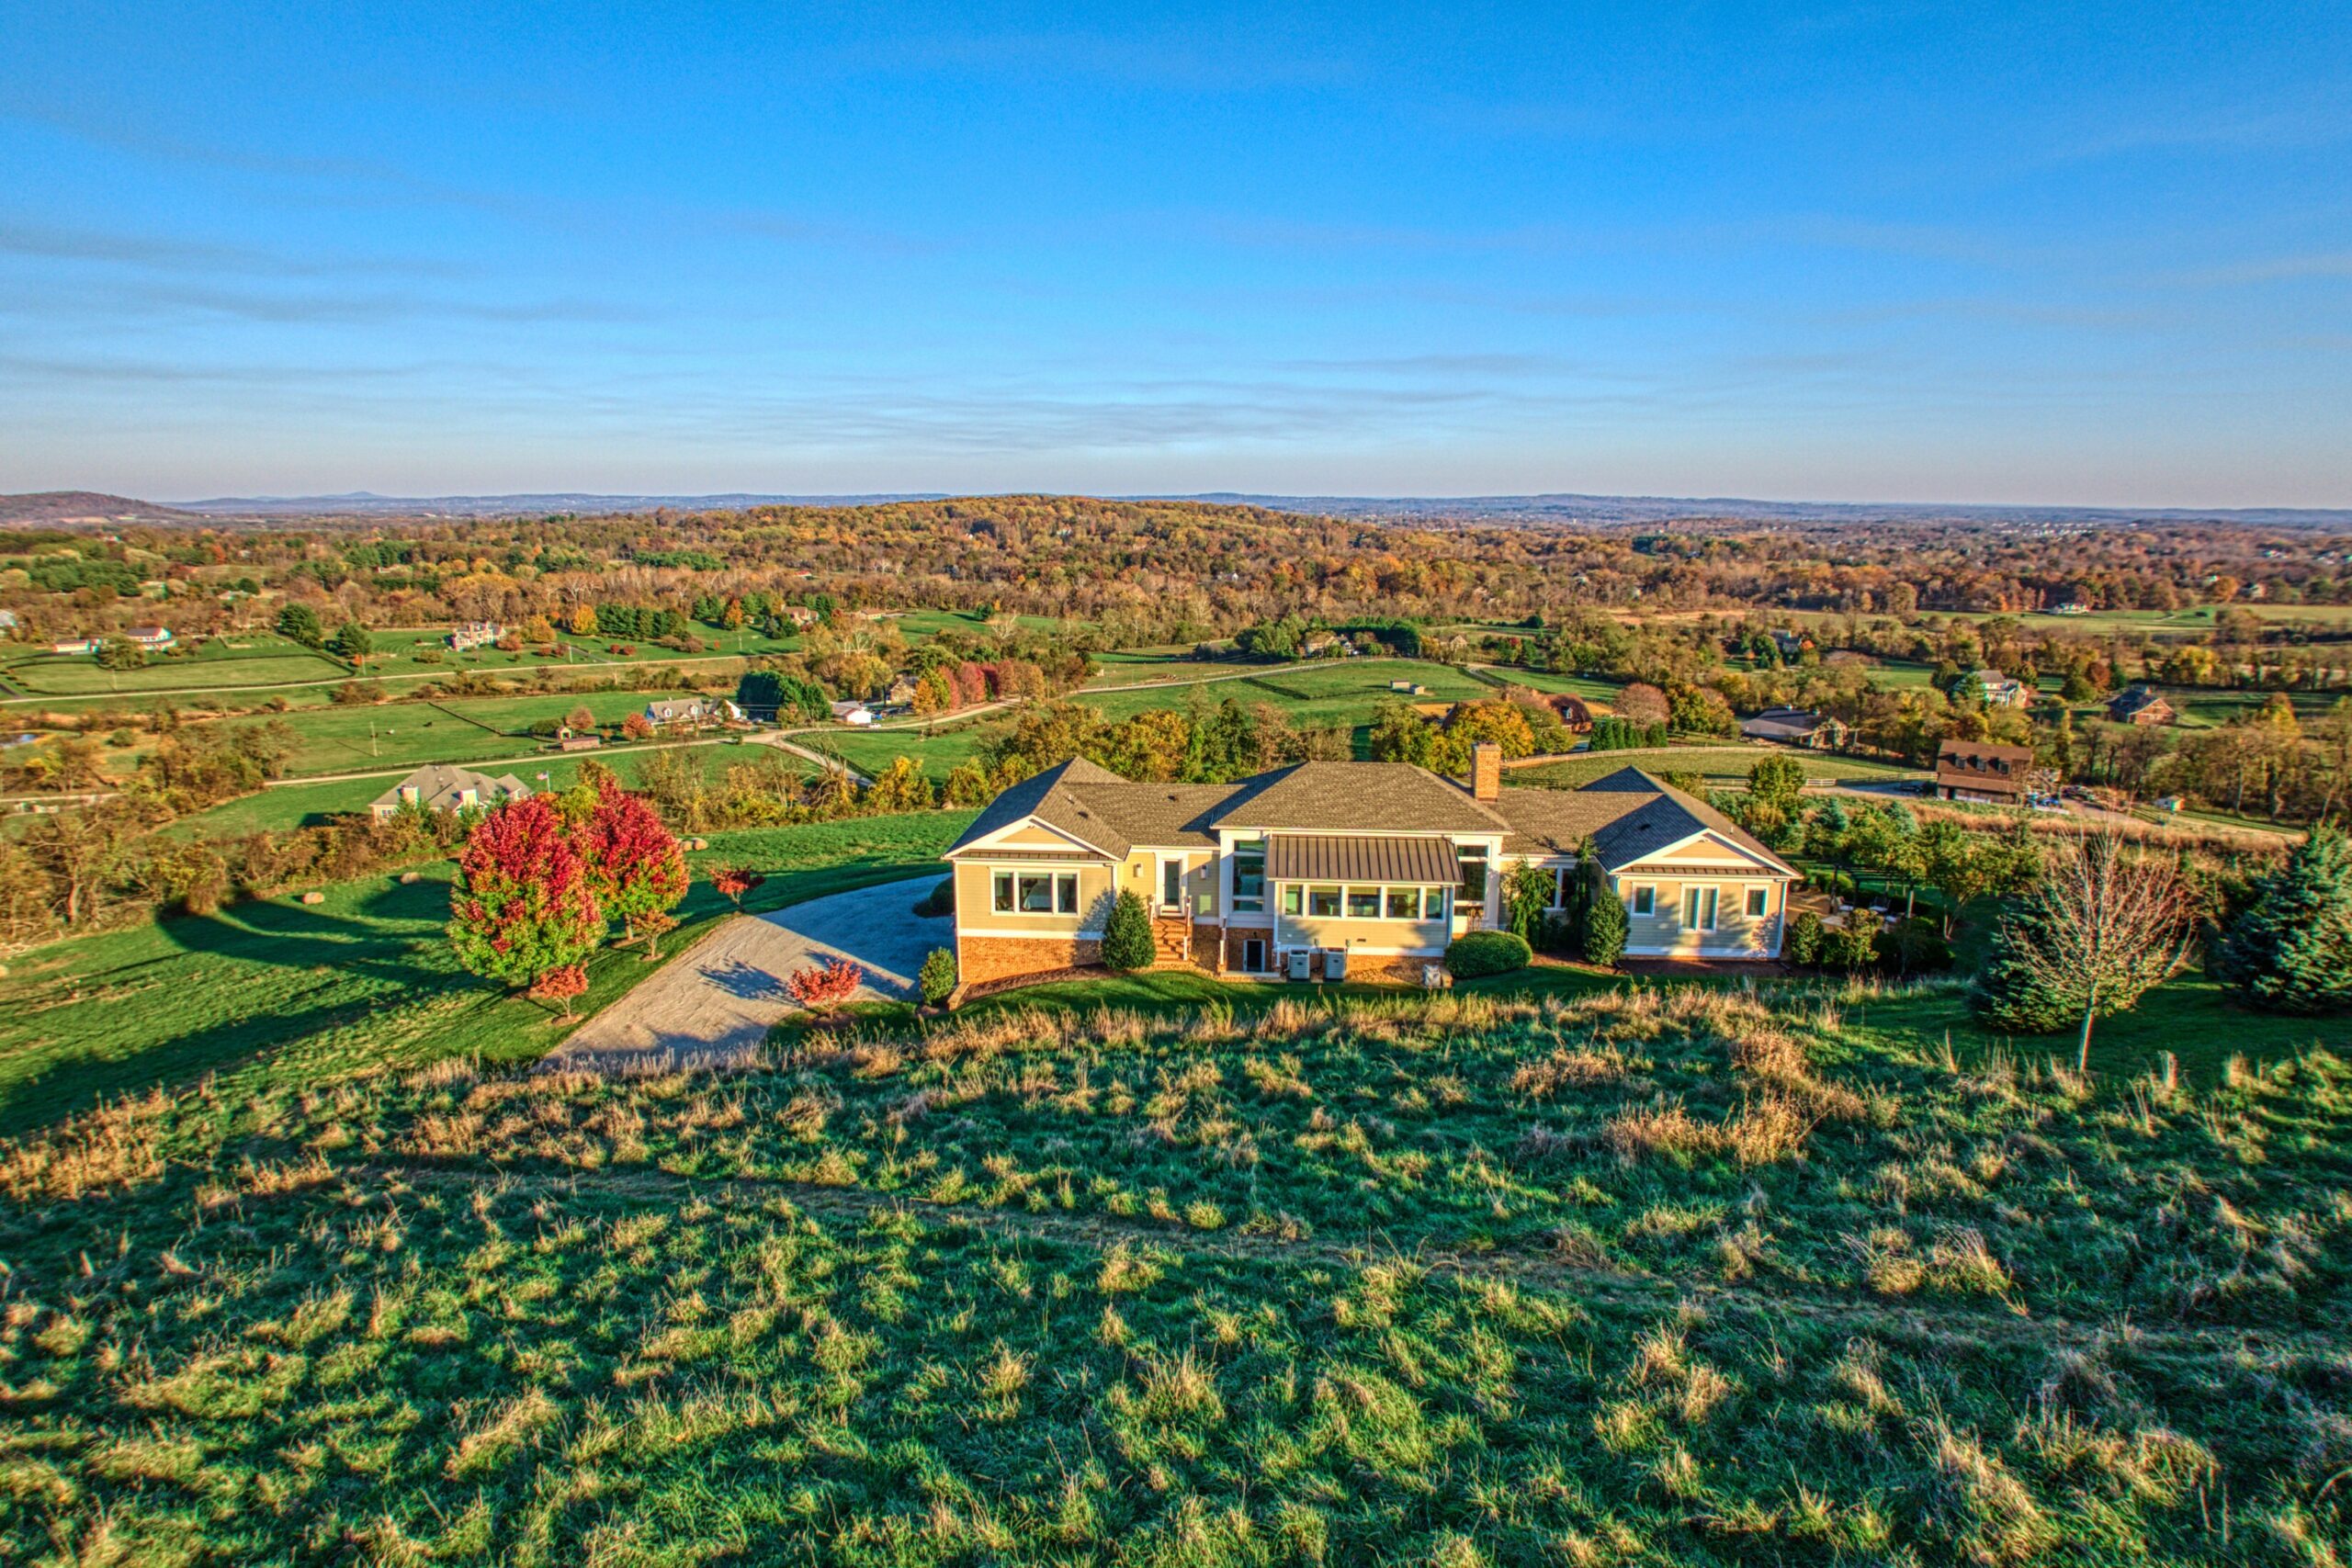 Professional exterior photo of 17151 Brookdale Ln in Round Hill, VA - showing the aerial view of the back of the home, views of the countryside below